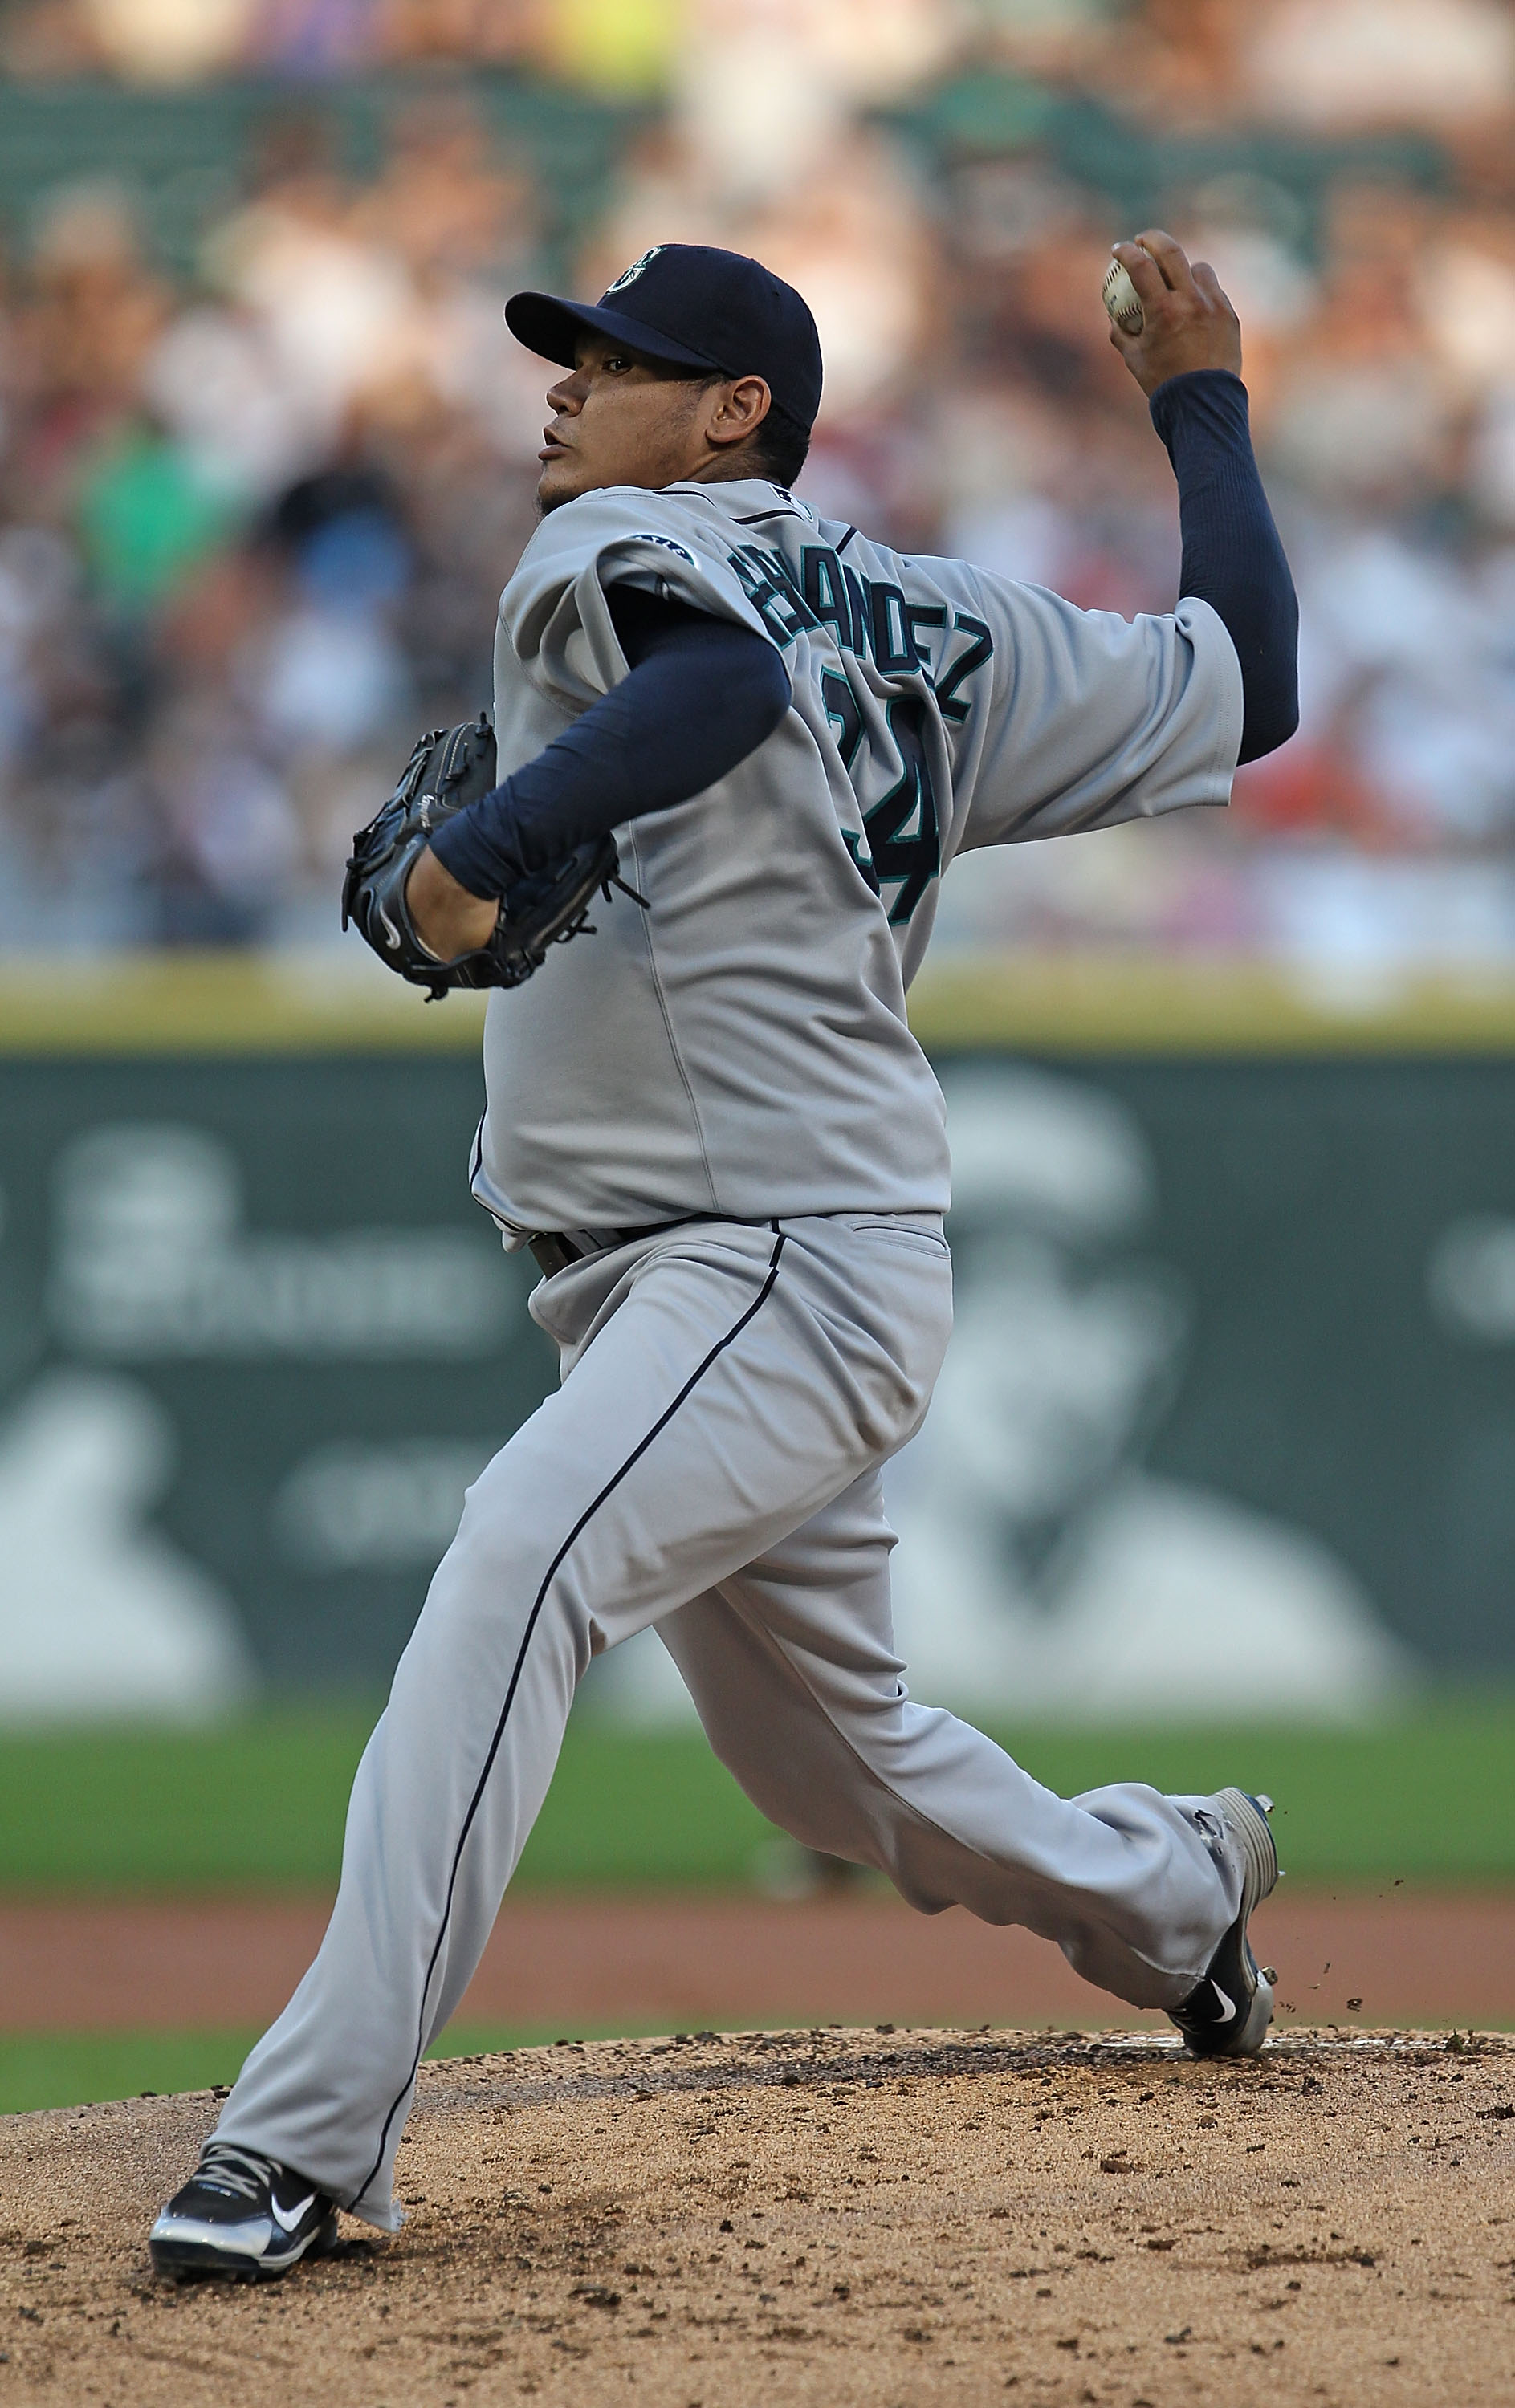 CHICAGO - JULY 26: Starting pitcher Felix Hernandez #34 of the Seattle Mariners delivers the ball against the Chicago White Sox at U.S. Cellular Field on July 26, 2010 in Chicago, Illinois. The White Sox defeated the Mariners 6-1. (Photo by Jonathan Danie